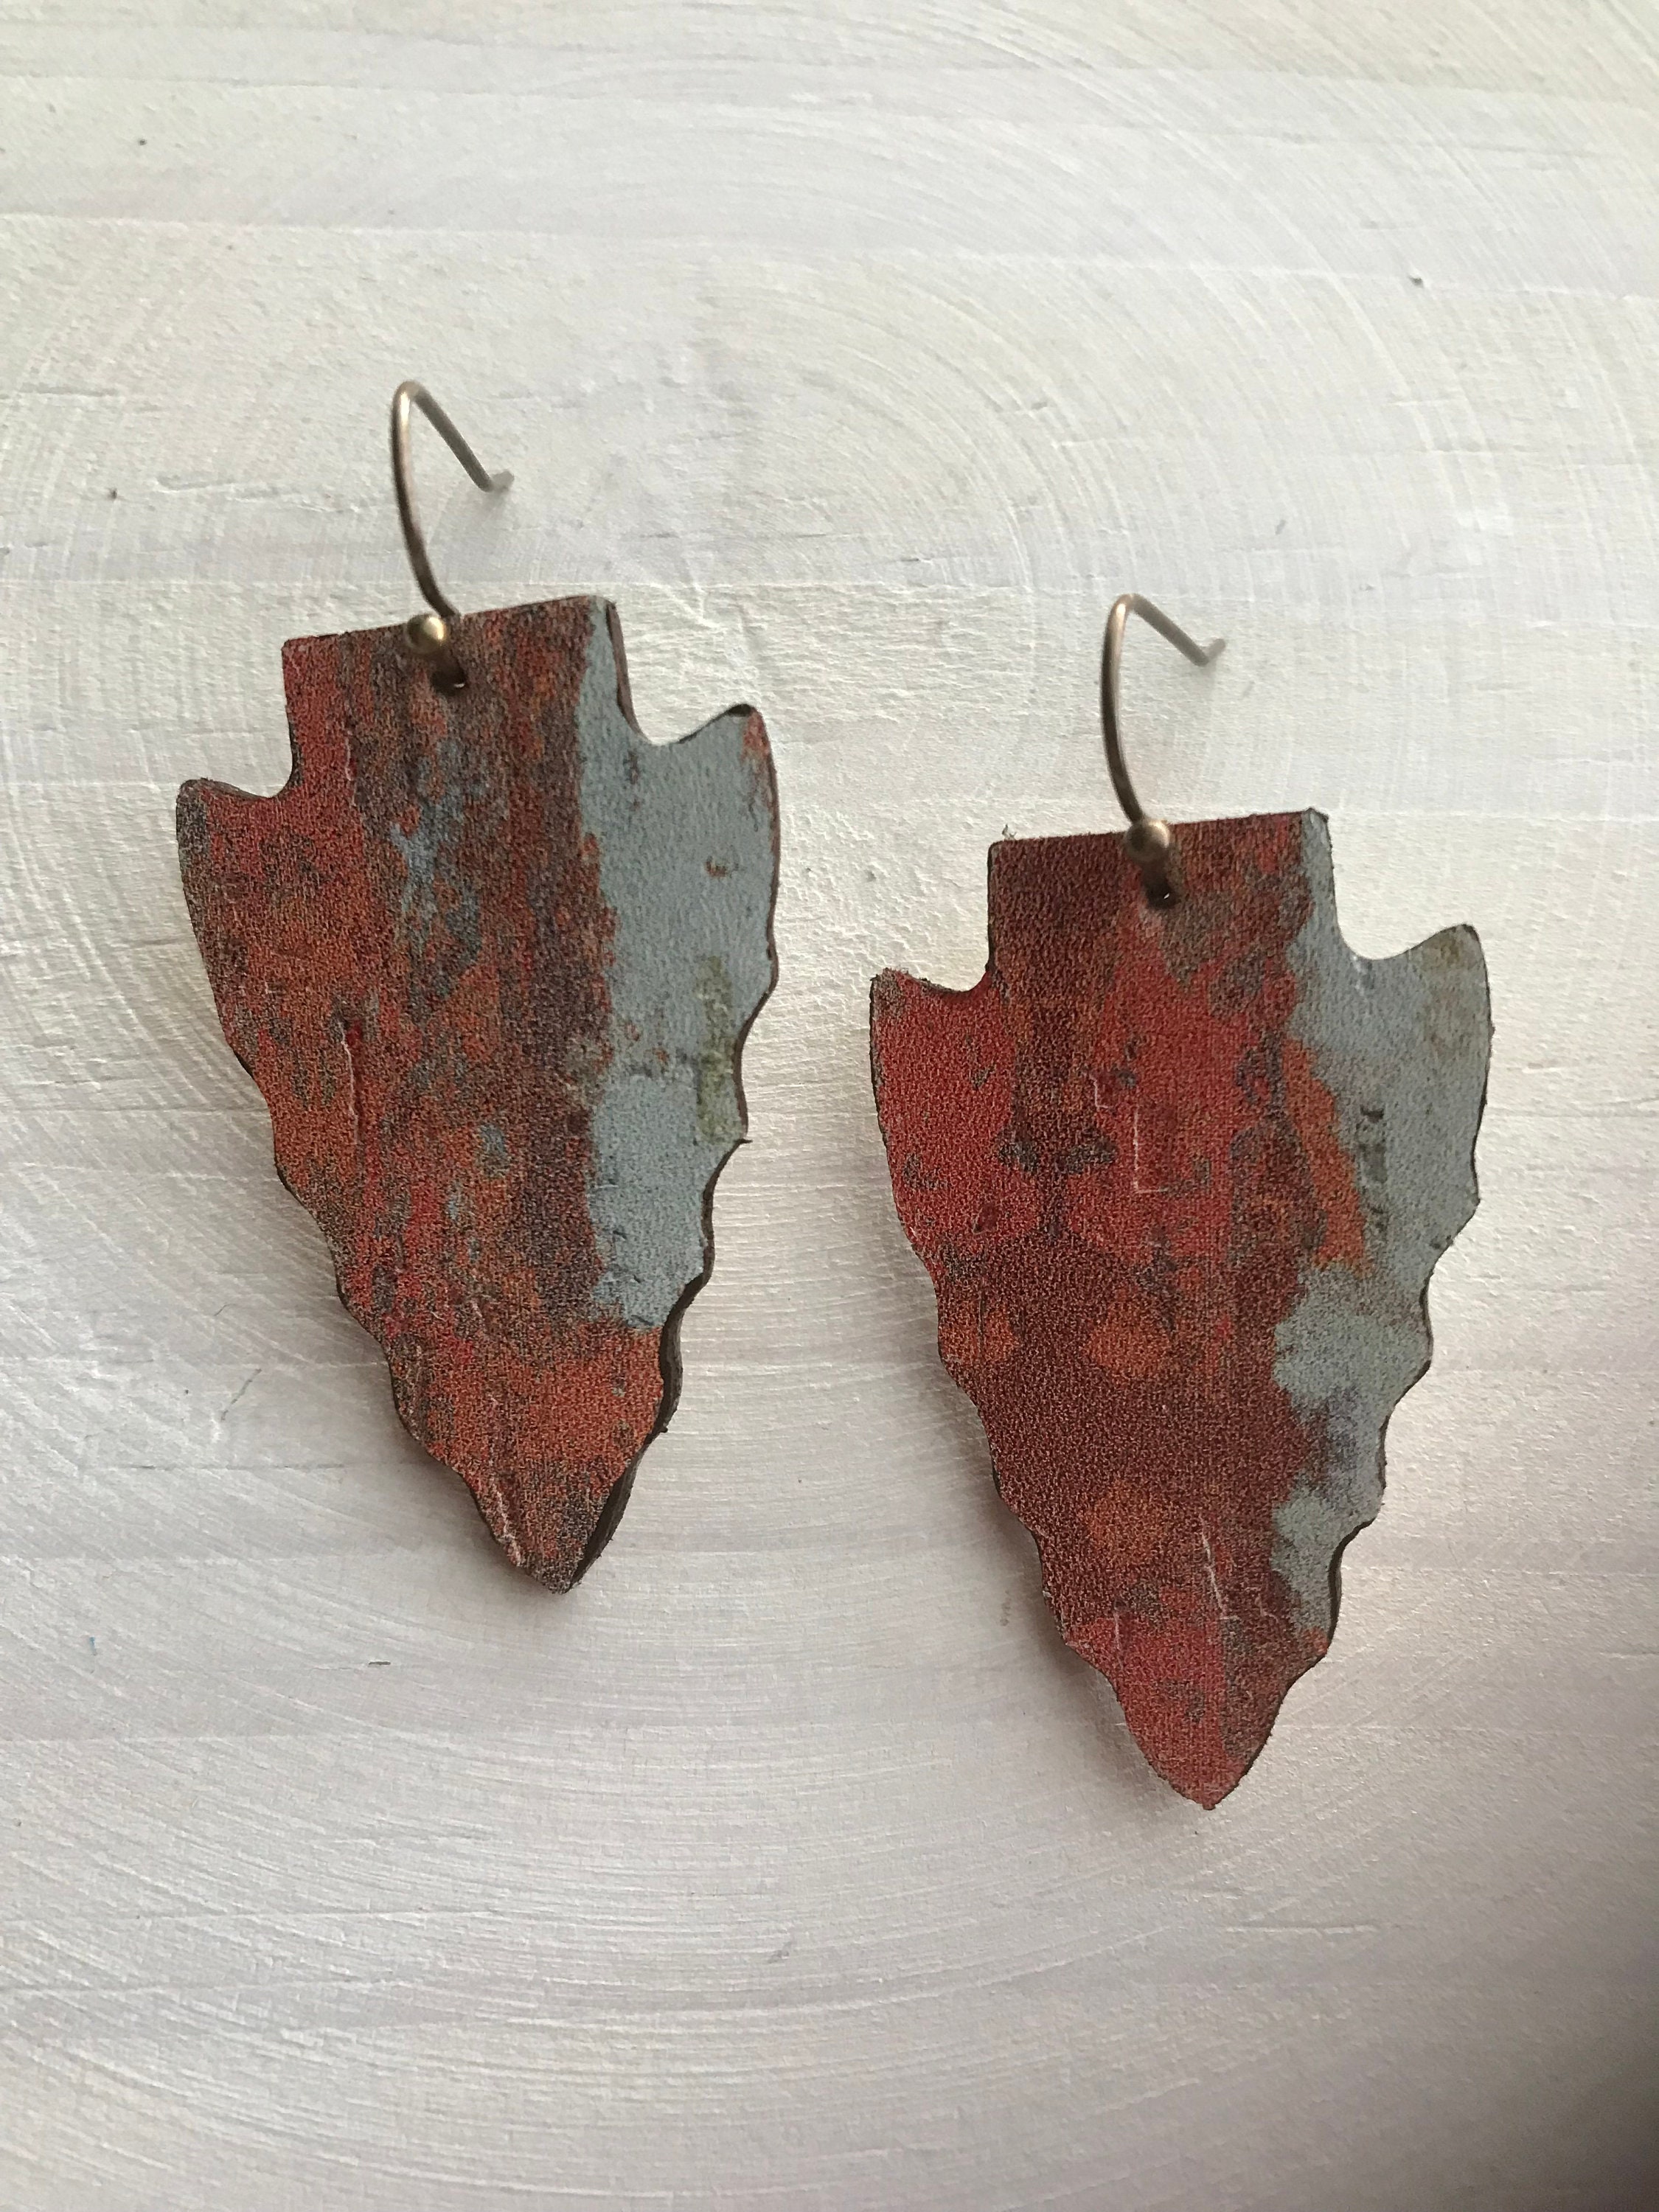 Mother’s Day gift for mom southwestern style Arrowhead earrings third anniversary gift for wife die cut cork leather